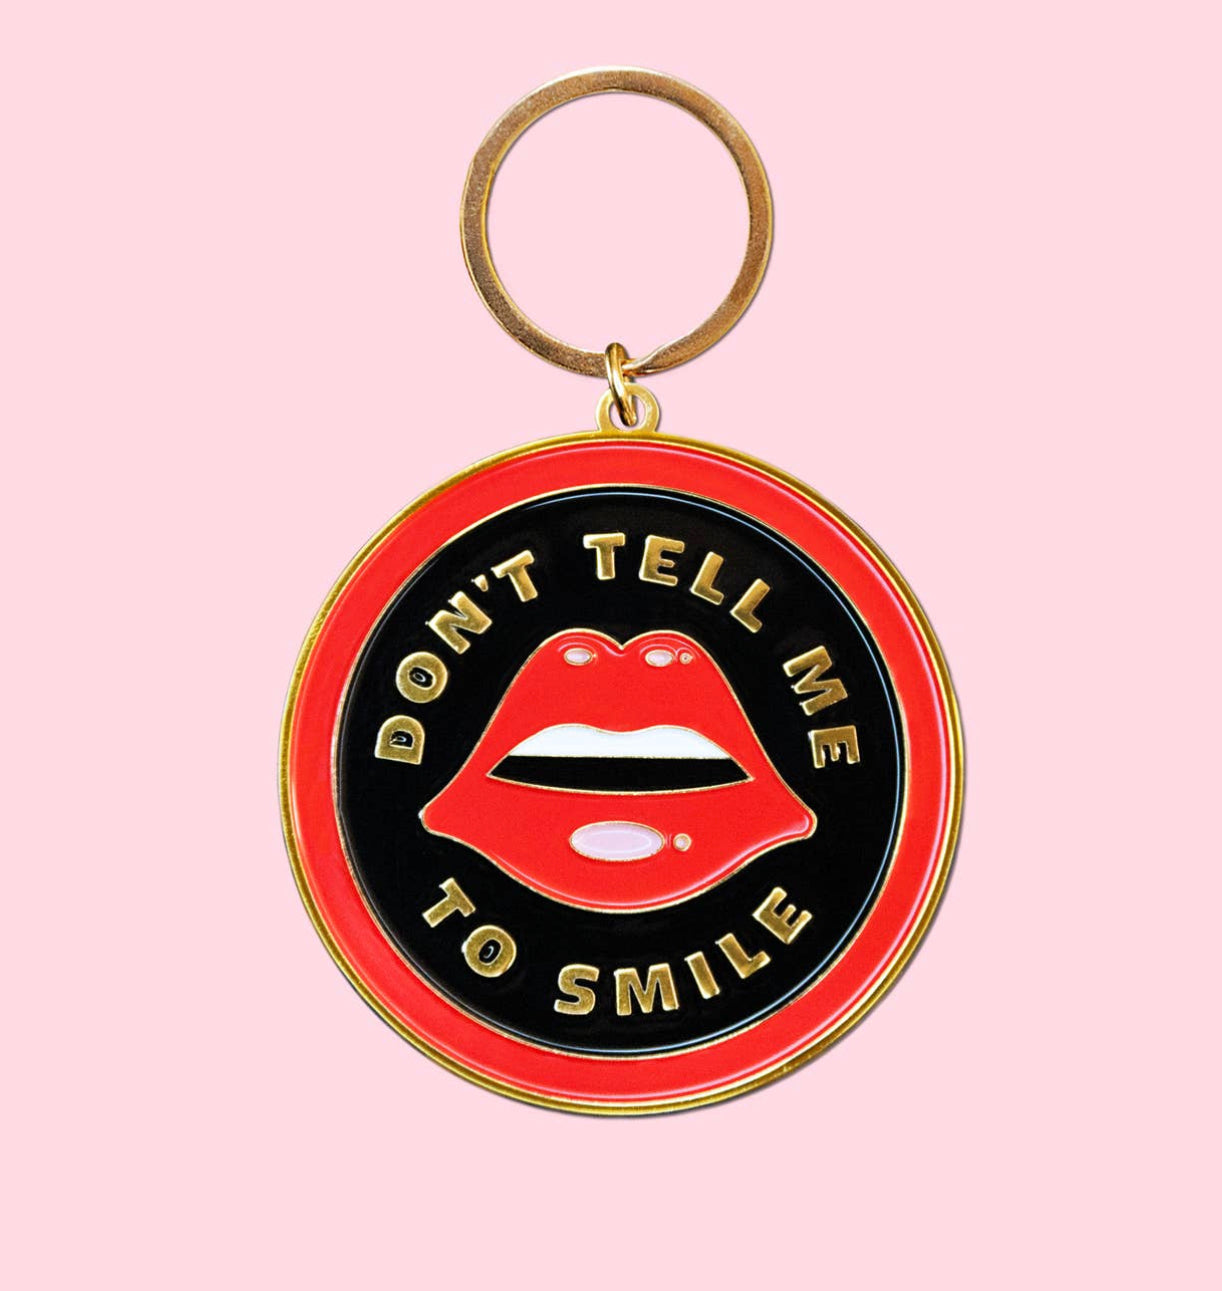 Don't Tell Me To Smile Keychain